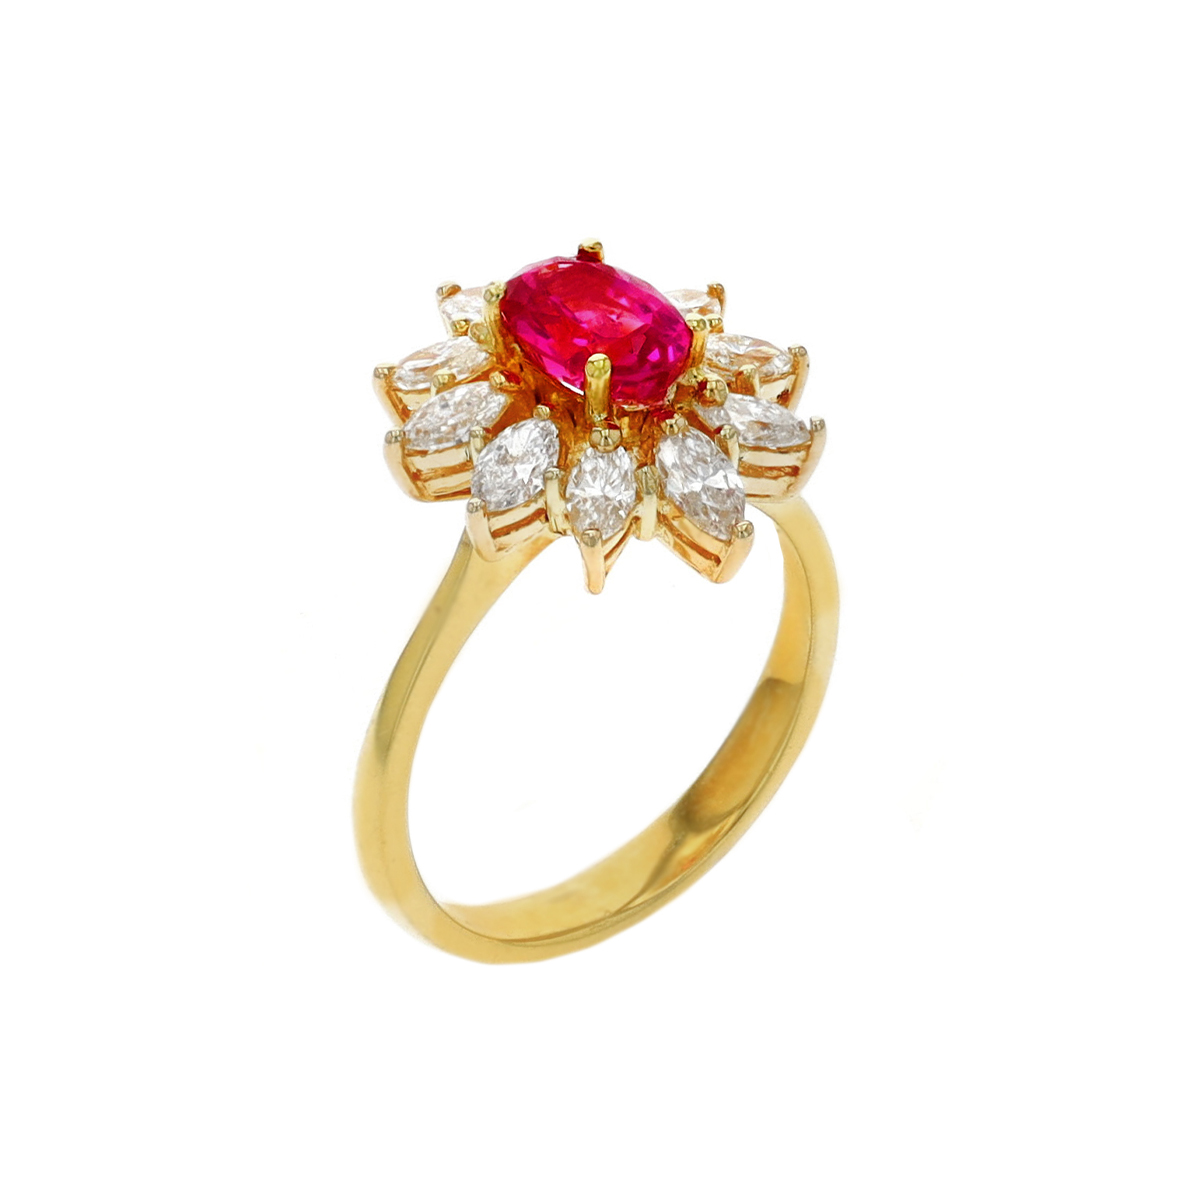 Estate 18K Yellow Gold Pink Spinel and Diamond Ring